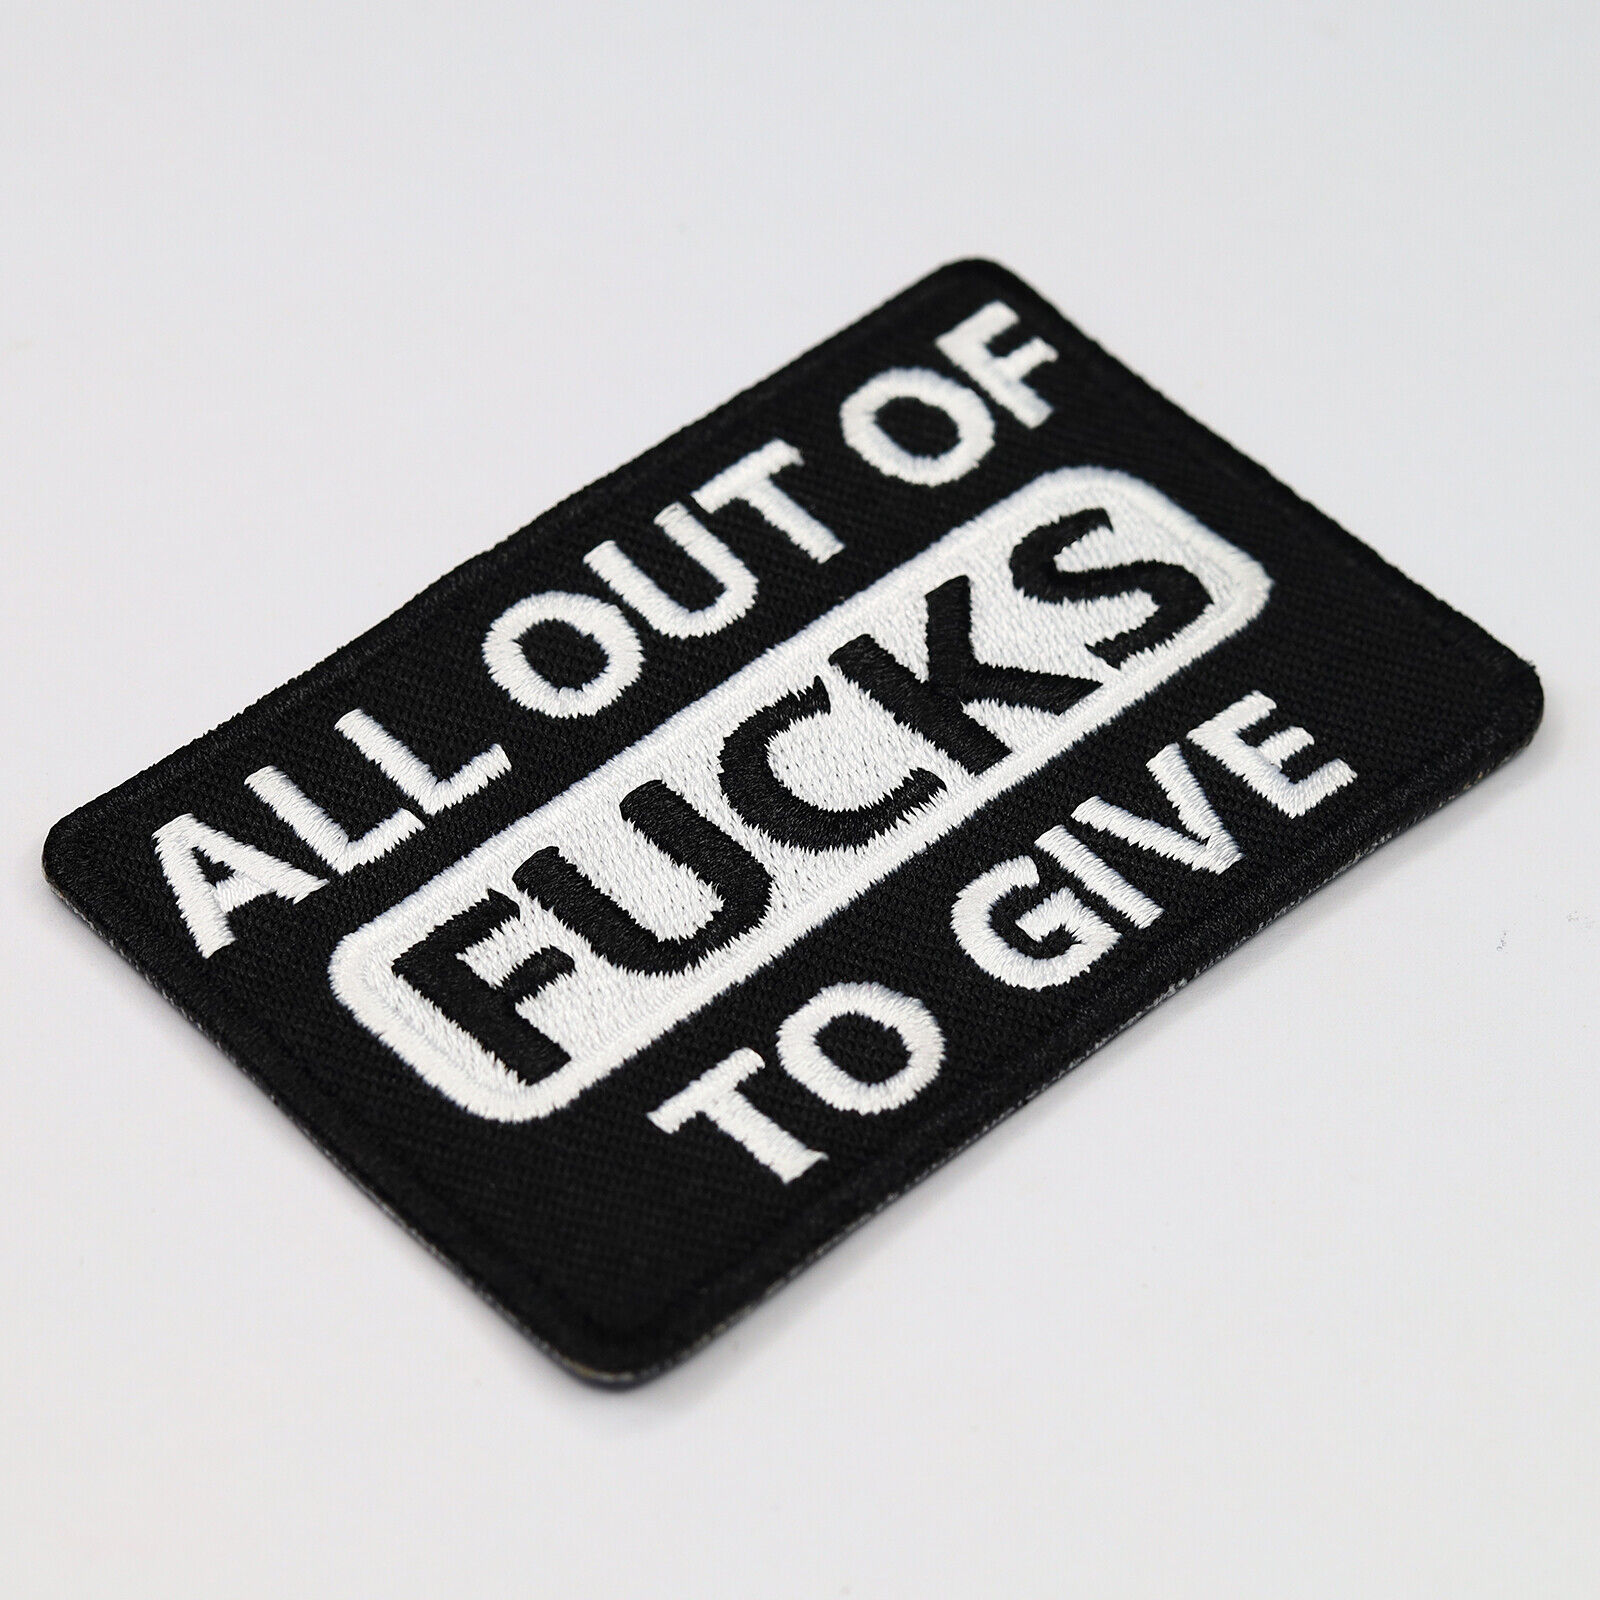 Lustiger Patch "Out of Fucks to give" Aufnäher Sticker Applikation 75x50mm